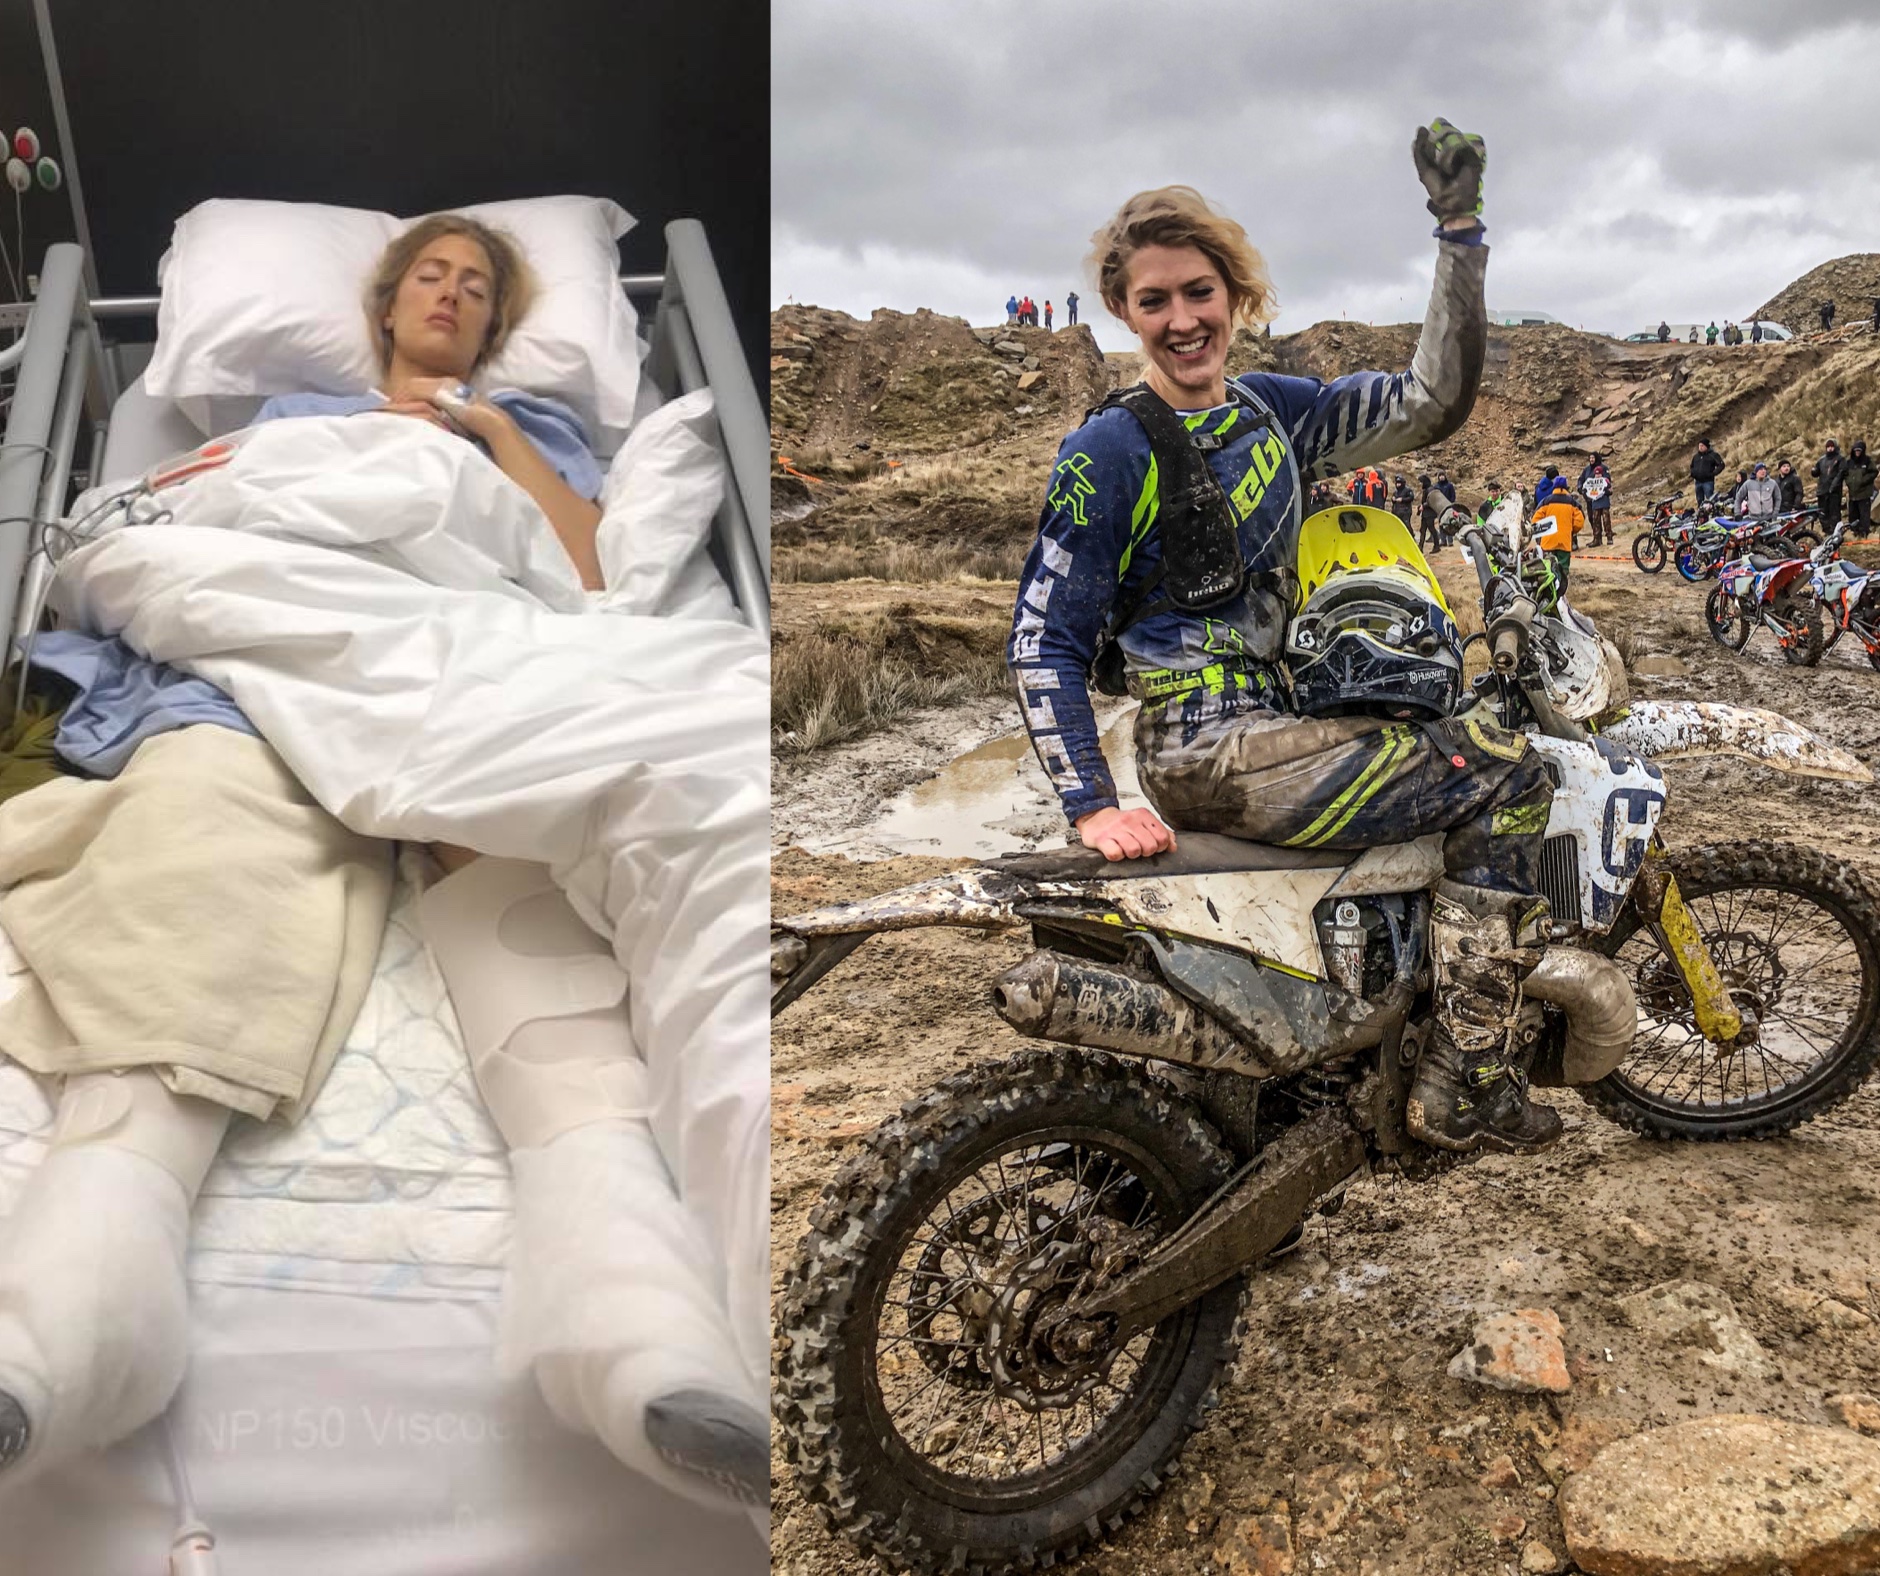 Vanessa Ruck, mid-recovery from her accident and post-surgeries, enjoying hard enduro